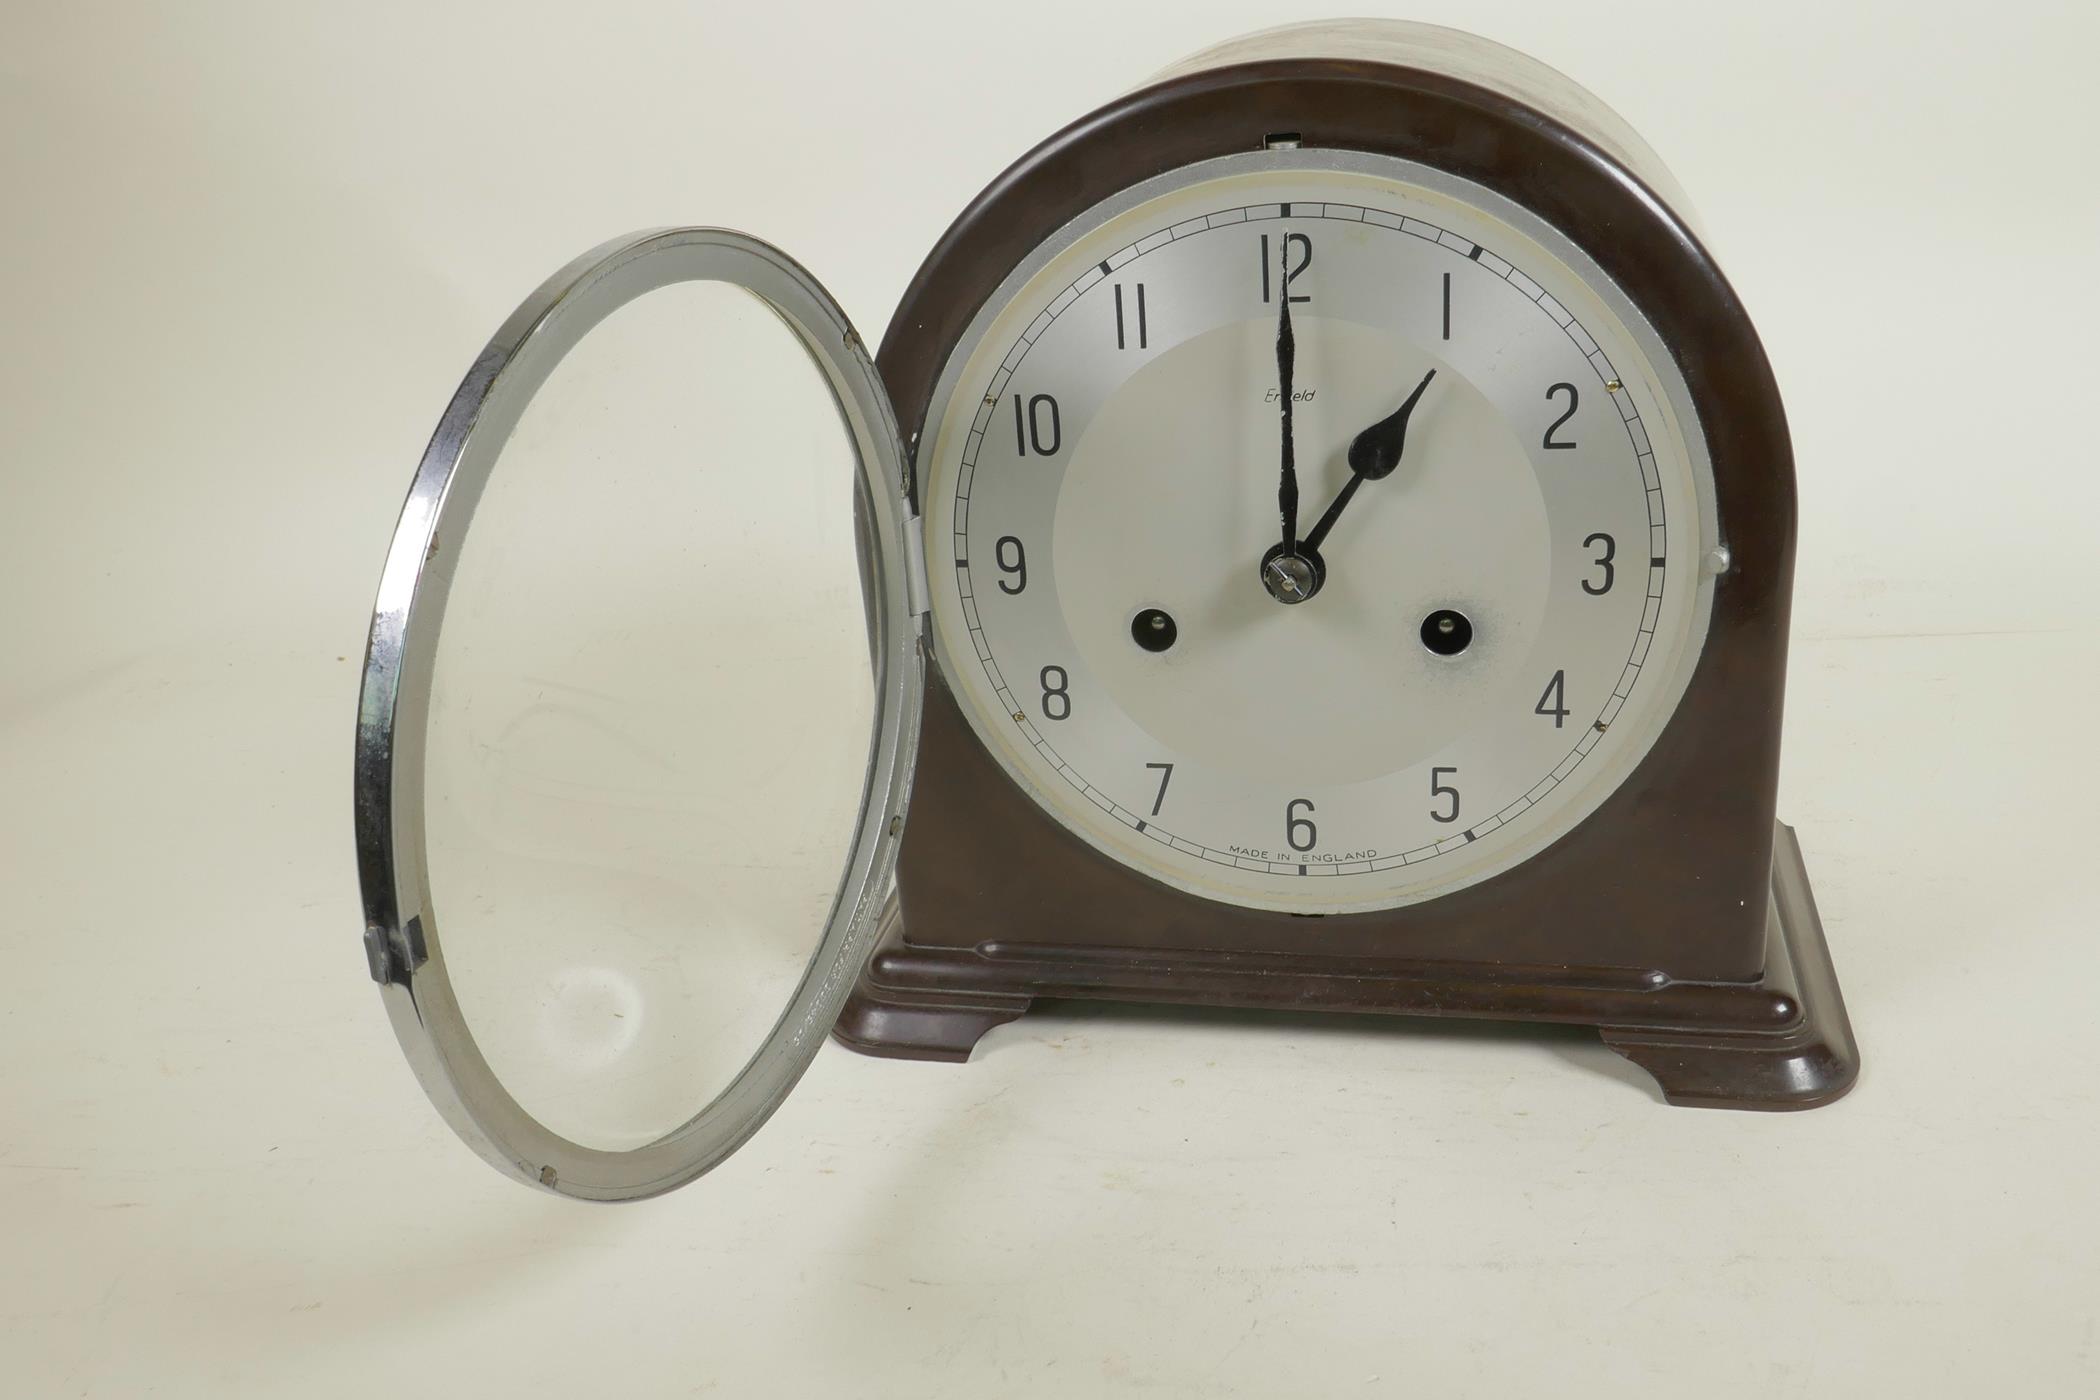 A mid C20th Smith's Enfield chiming mantel clock, dark wood effect bakelite casing and silver - Image 6 of 7